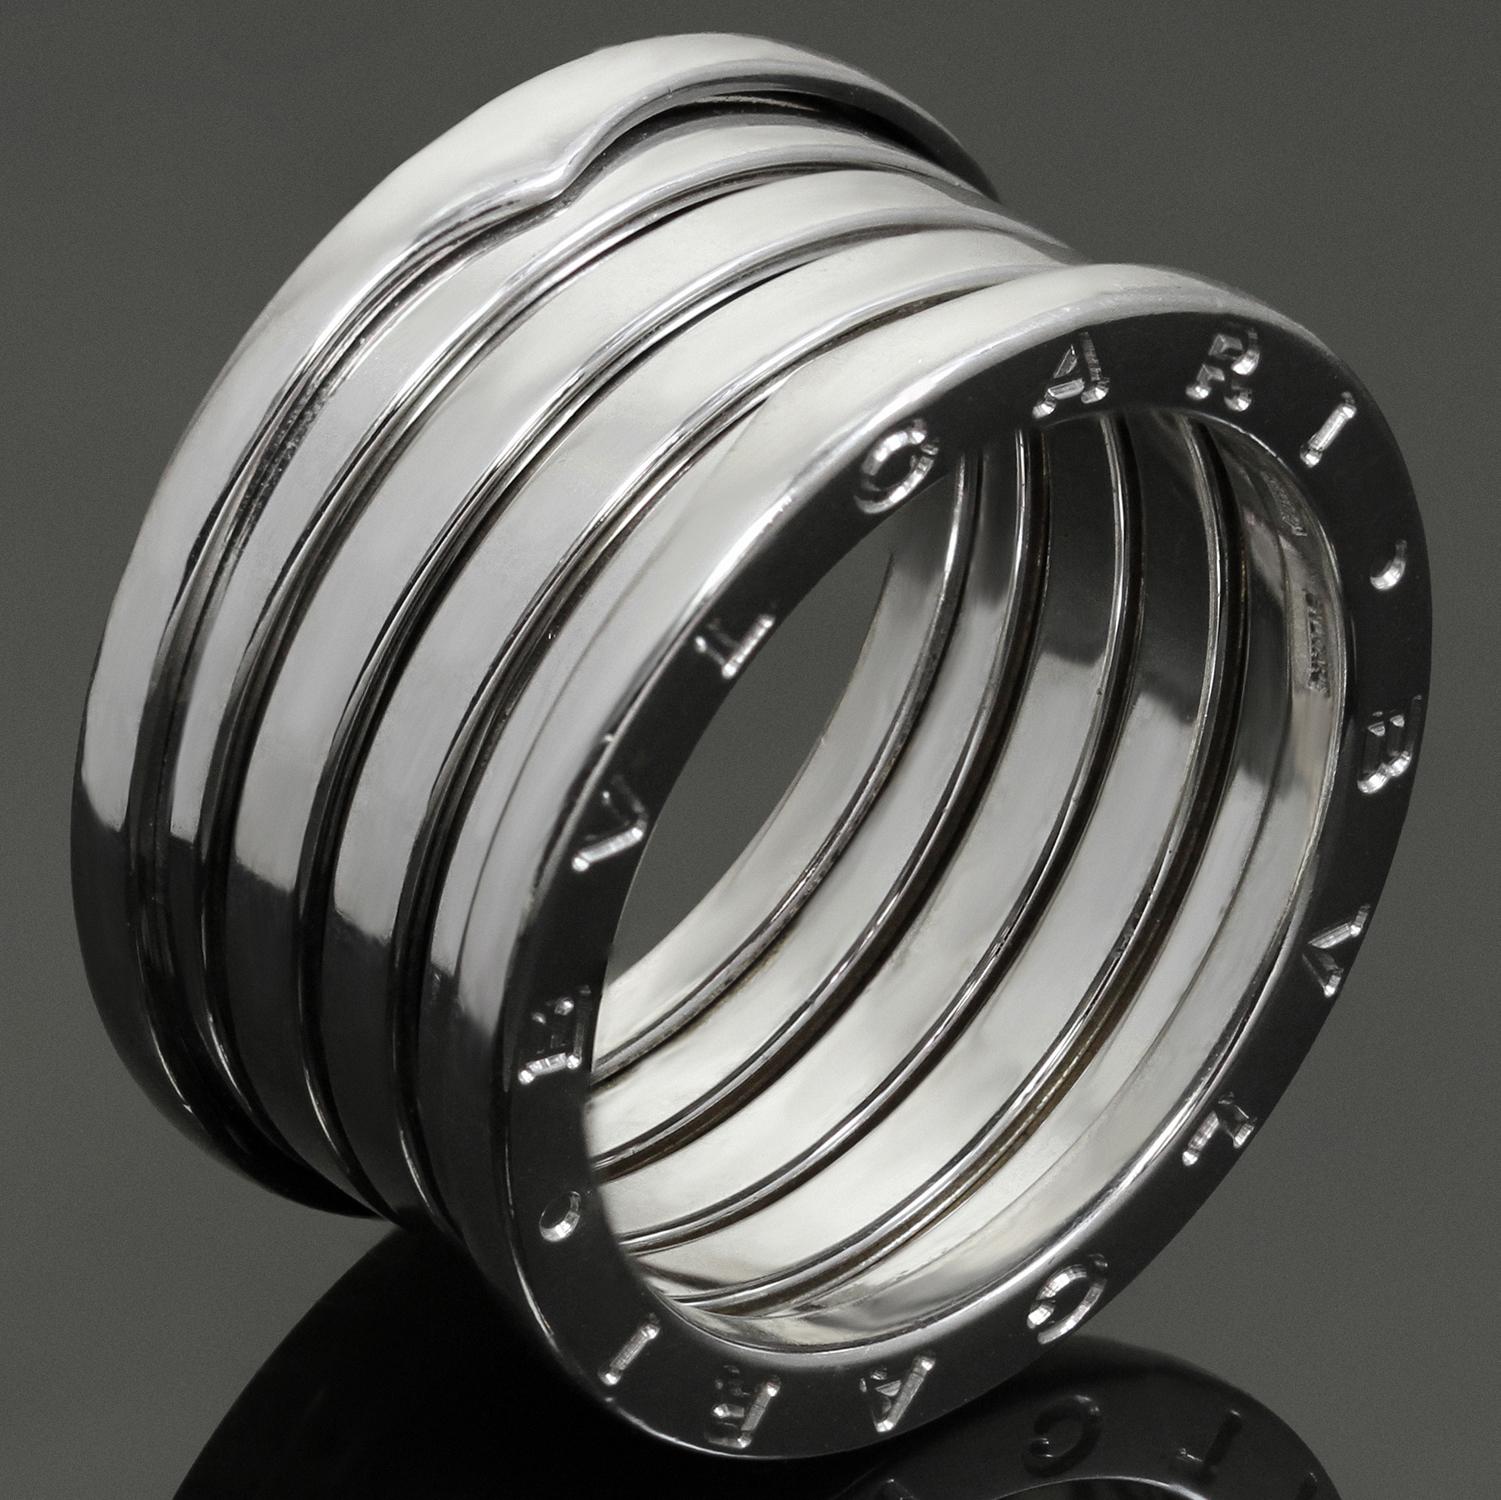 This unisex ring from Bulgari's iconic B.zero1 collection is crafted in 18k white gold and features a 5-band design engraved with the Bvlgari logo on both sides. Made in Italy circa 2010s. Measurements: 0.51